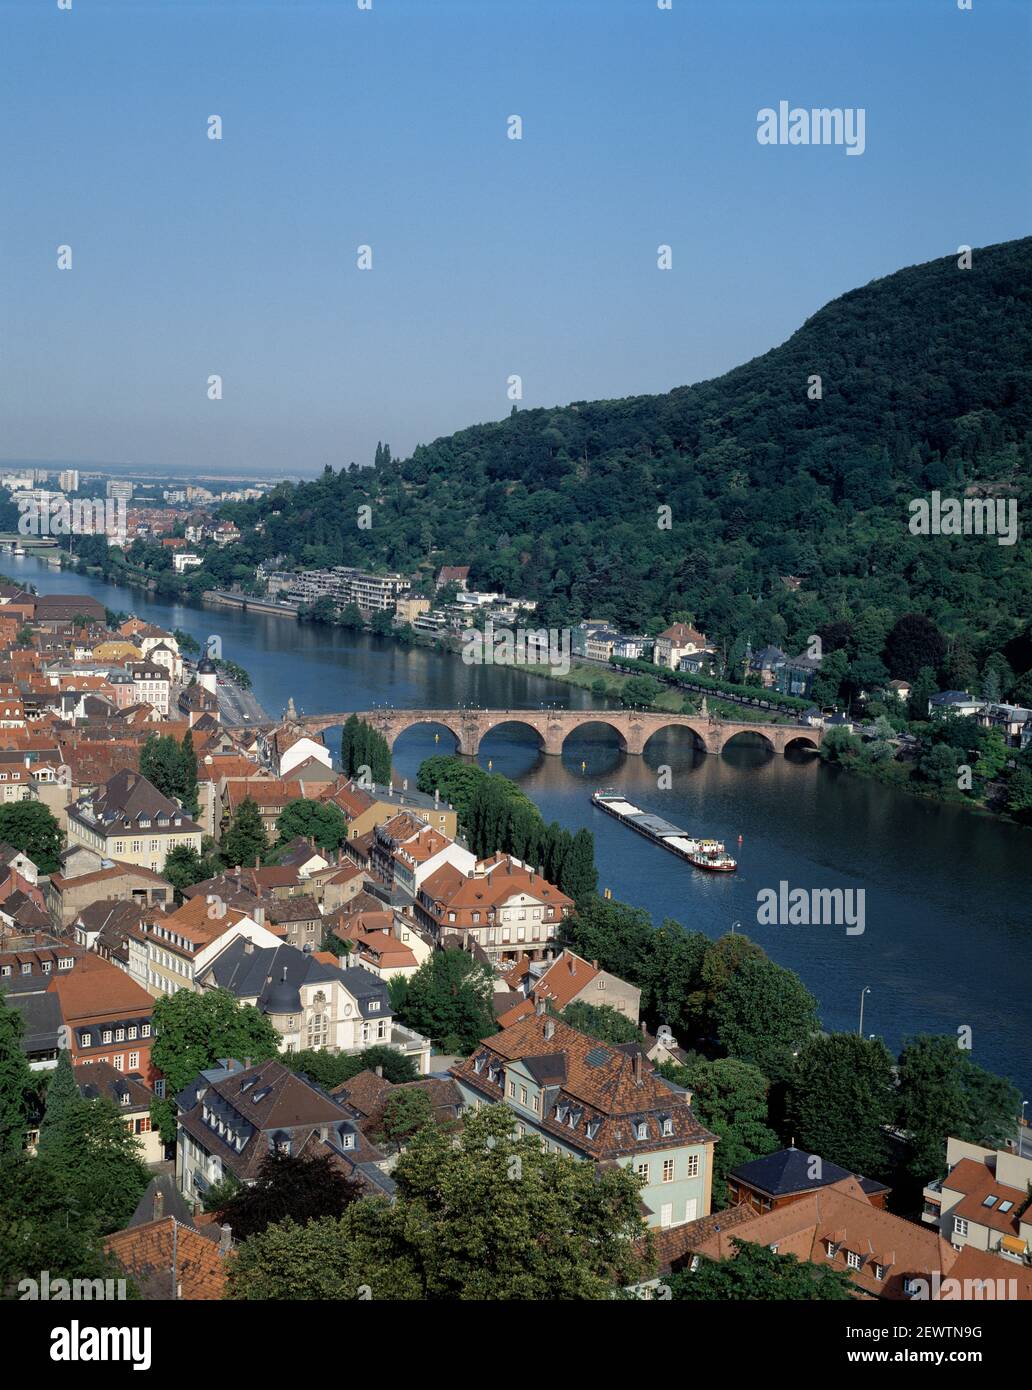 Germany. Baden-Württemberg. Heidelberg. High viewpoint of the town with barge on the River Neckar. Stock Photo